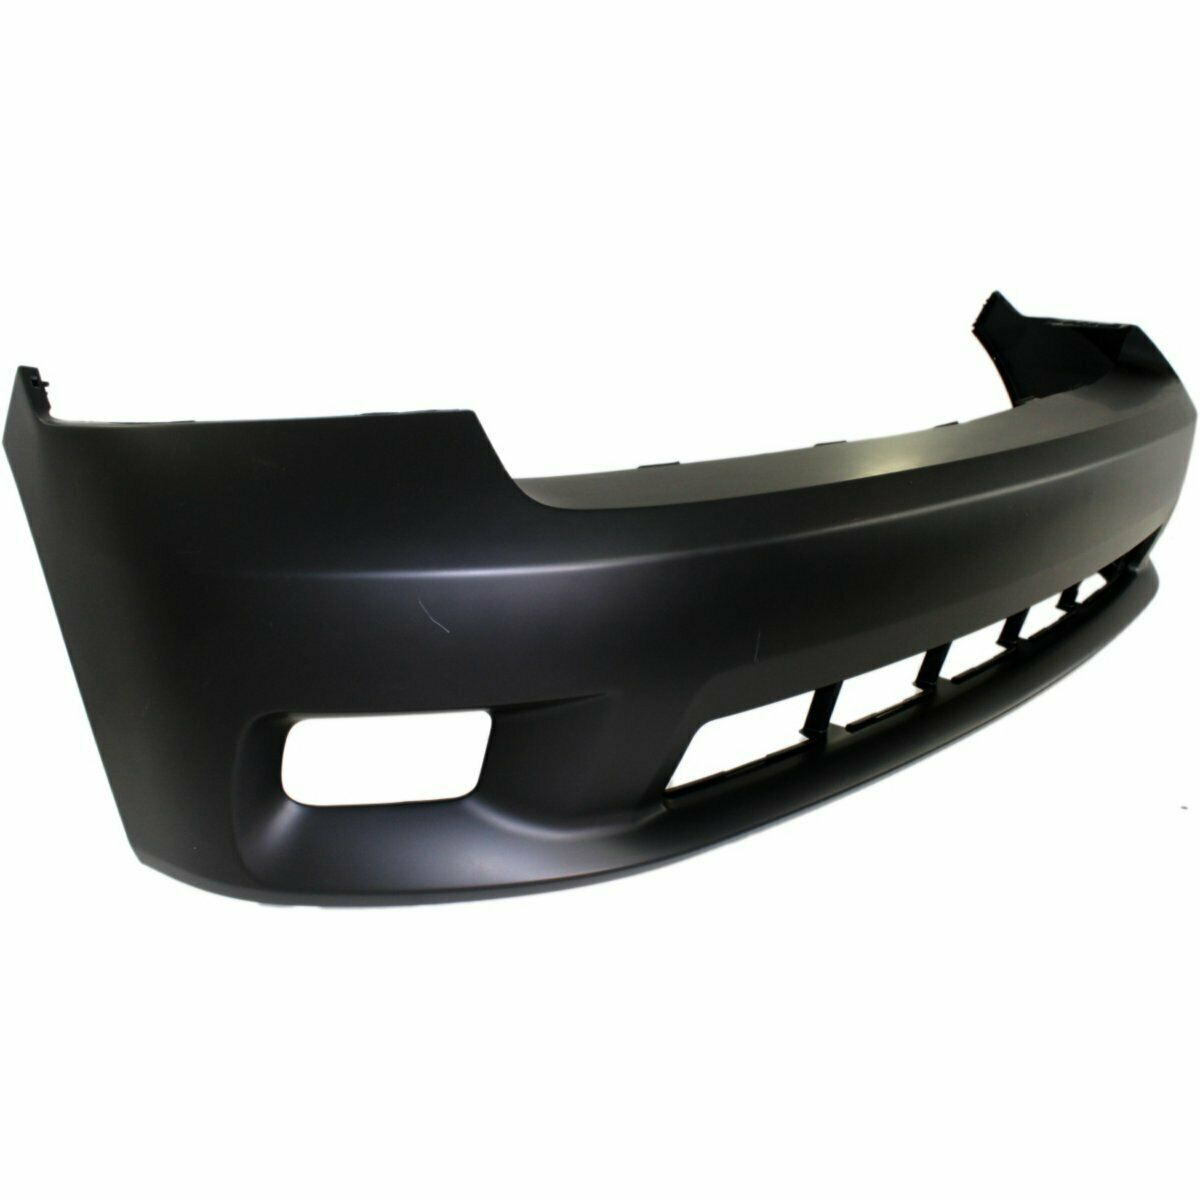 2009-2012 Dodge Ram Truck Sport Front Bumper Painted to Match